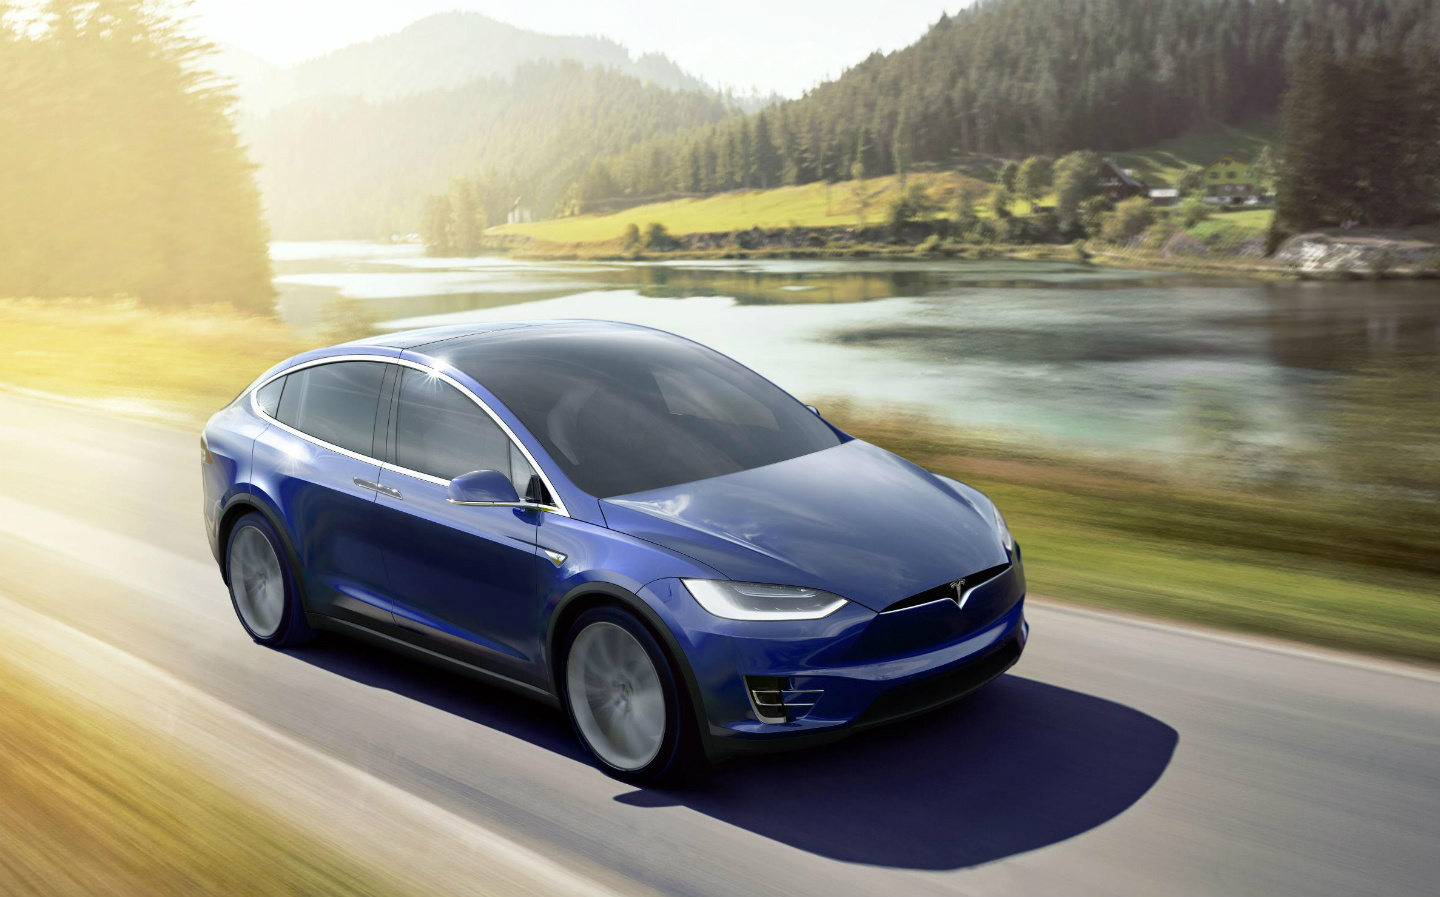 Tesla Model X is one of the the best cars to avoid paying road tax (VED)